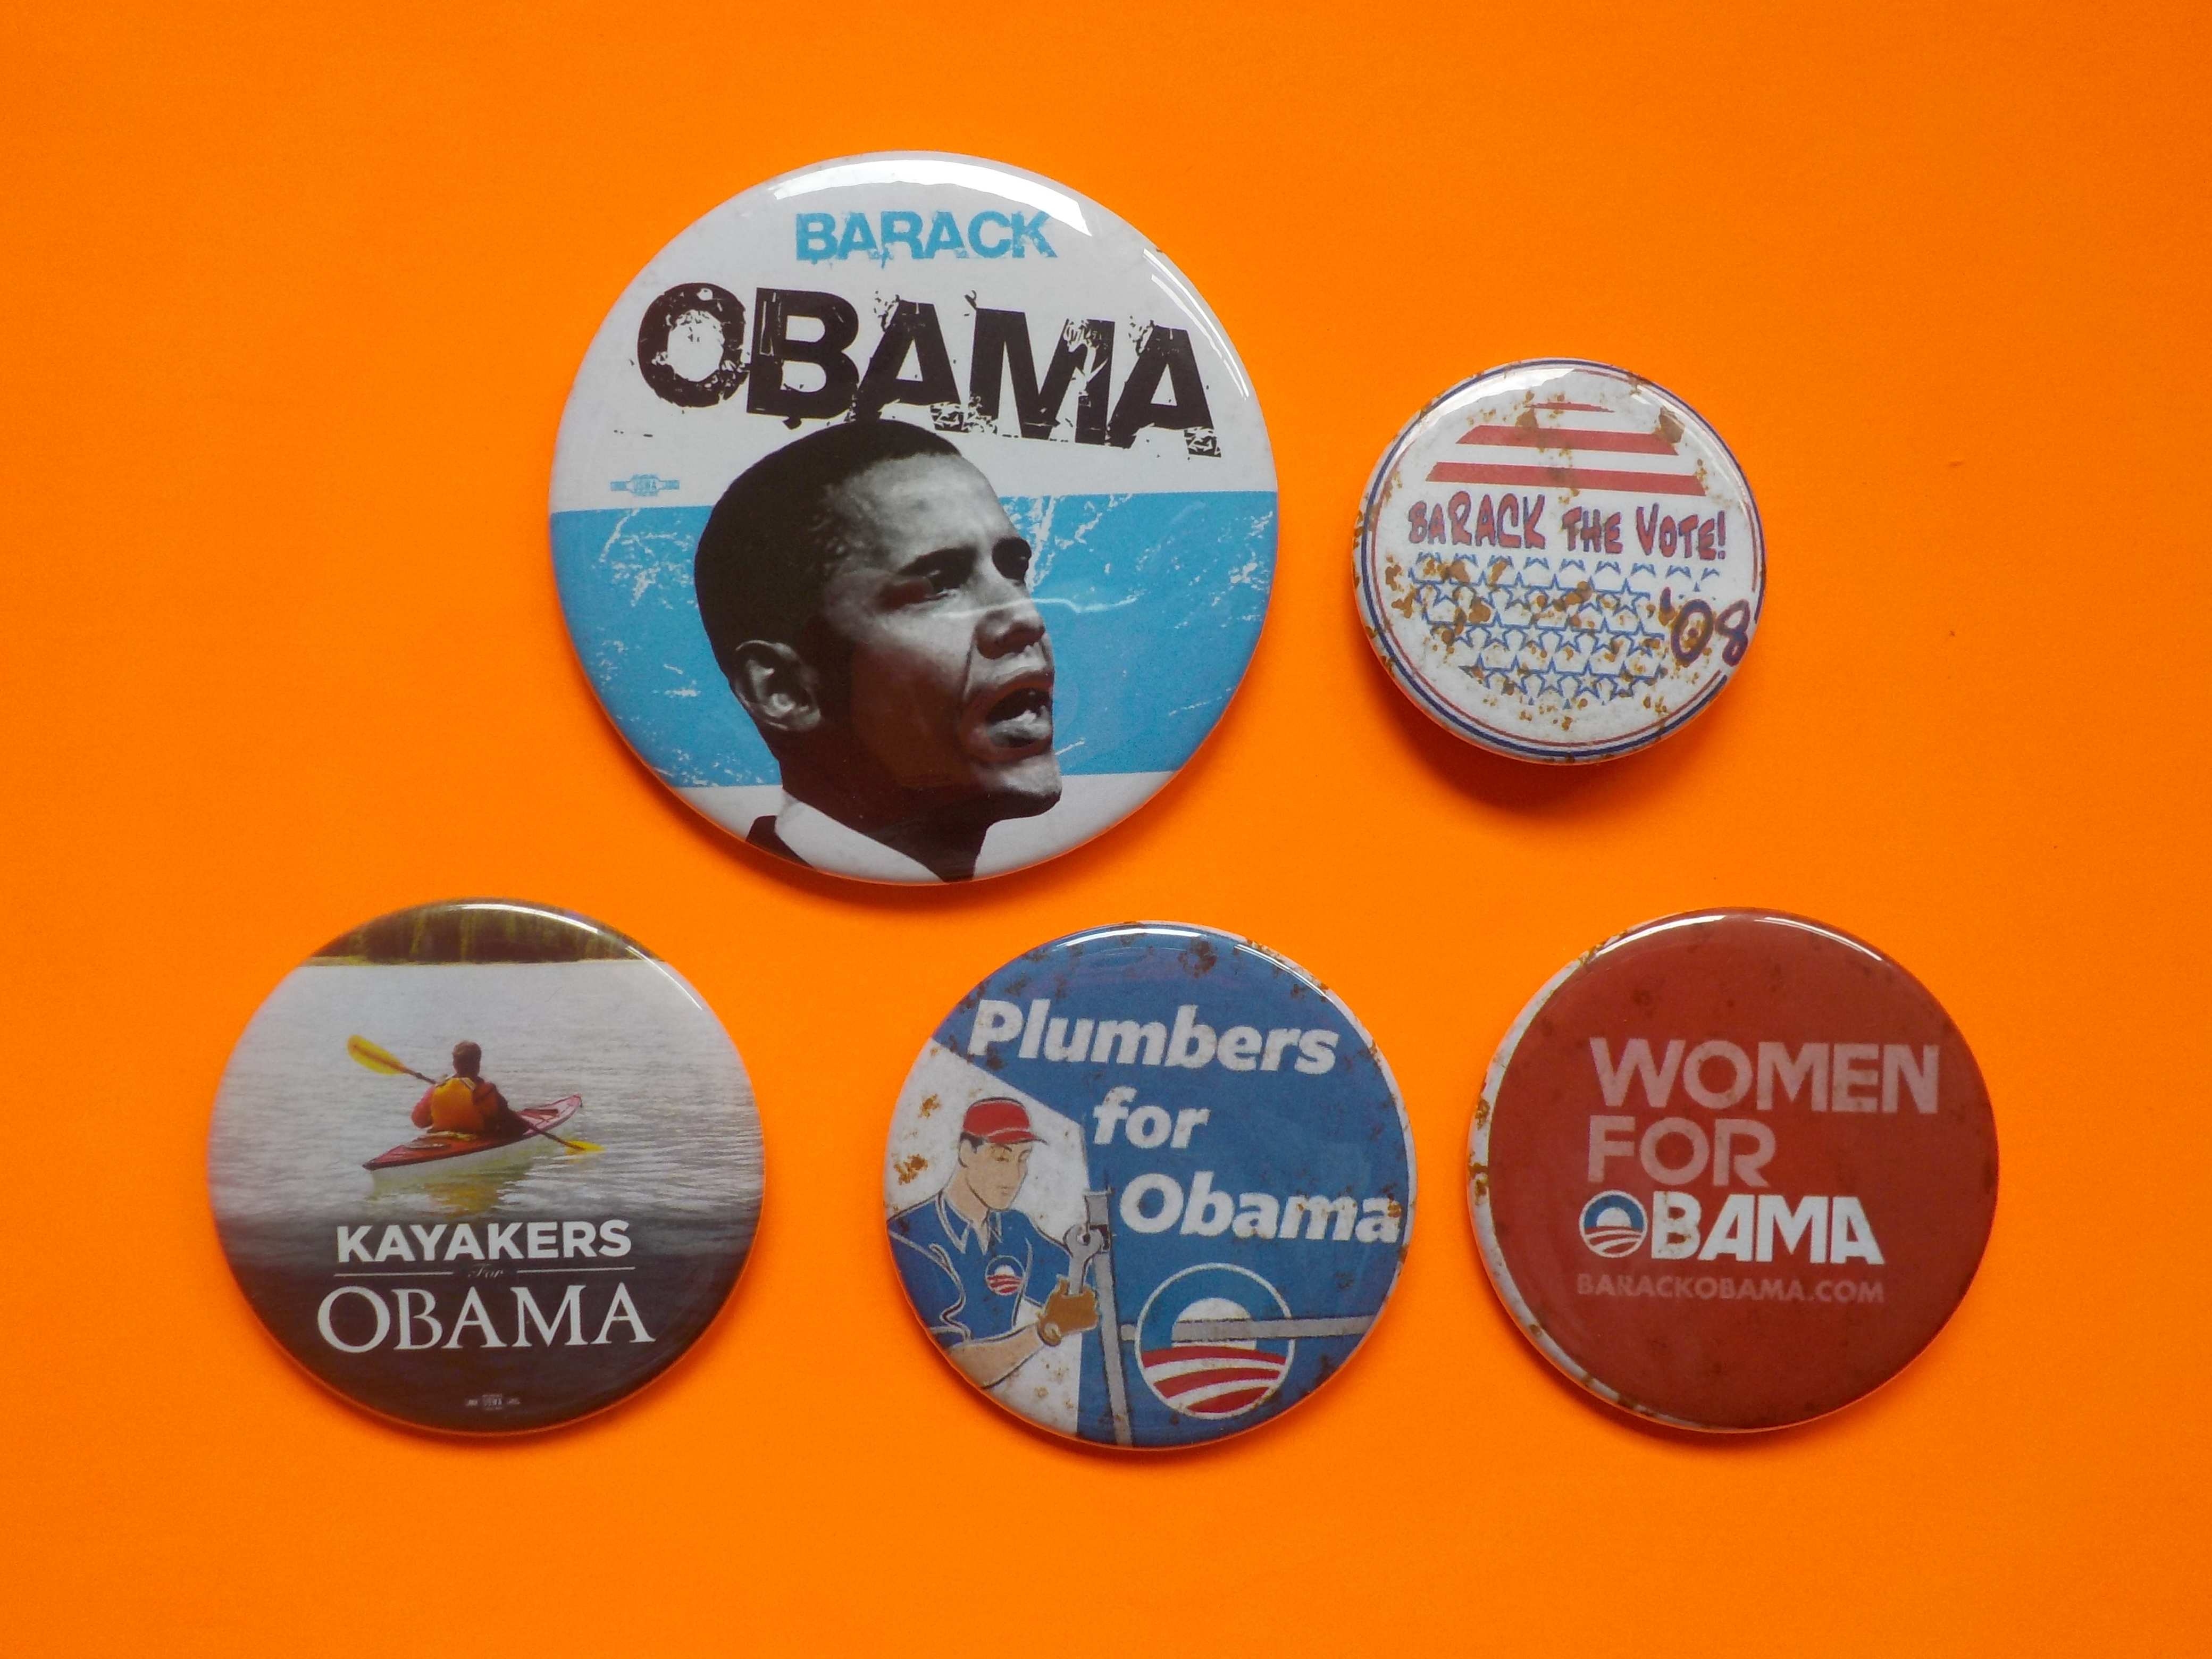 Obama '08 buttons